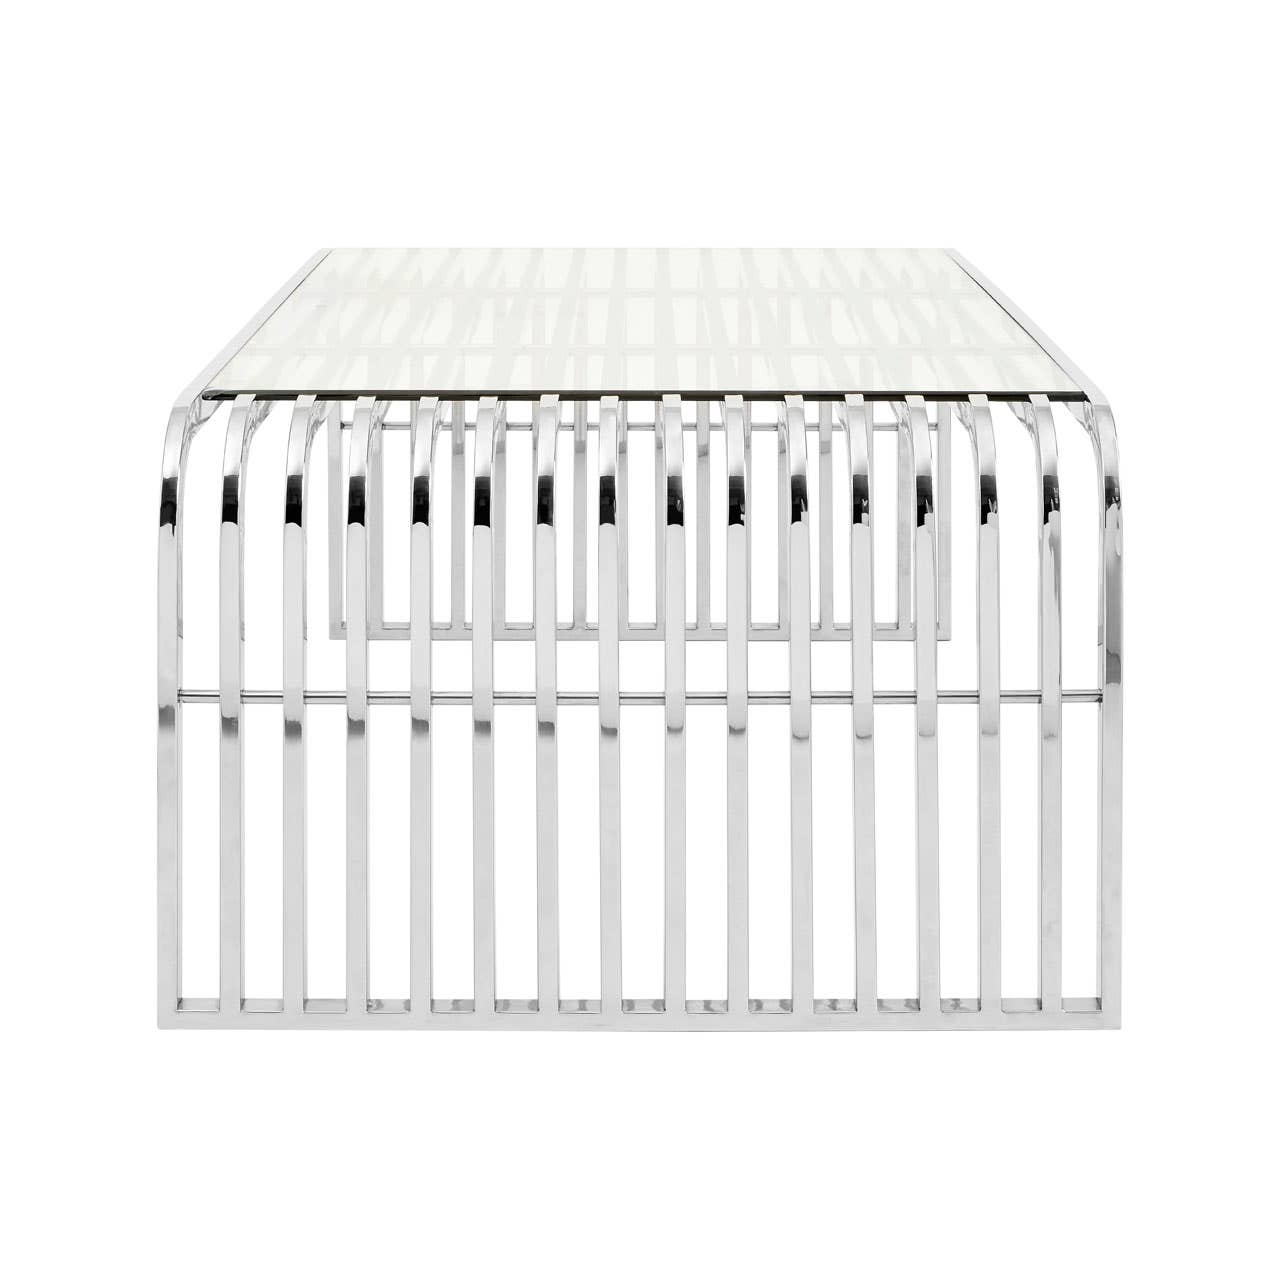 Noosa & Co. Living Vogue Slatted Coffee Table House of Isabella UK